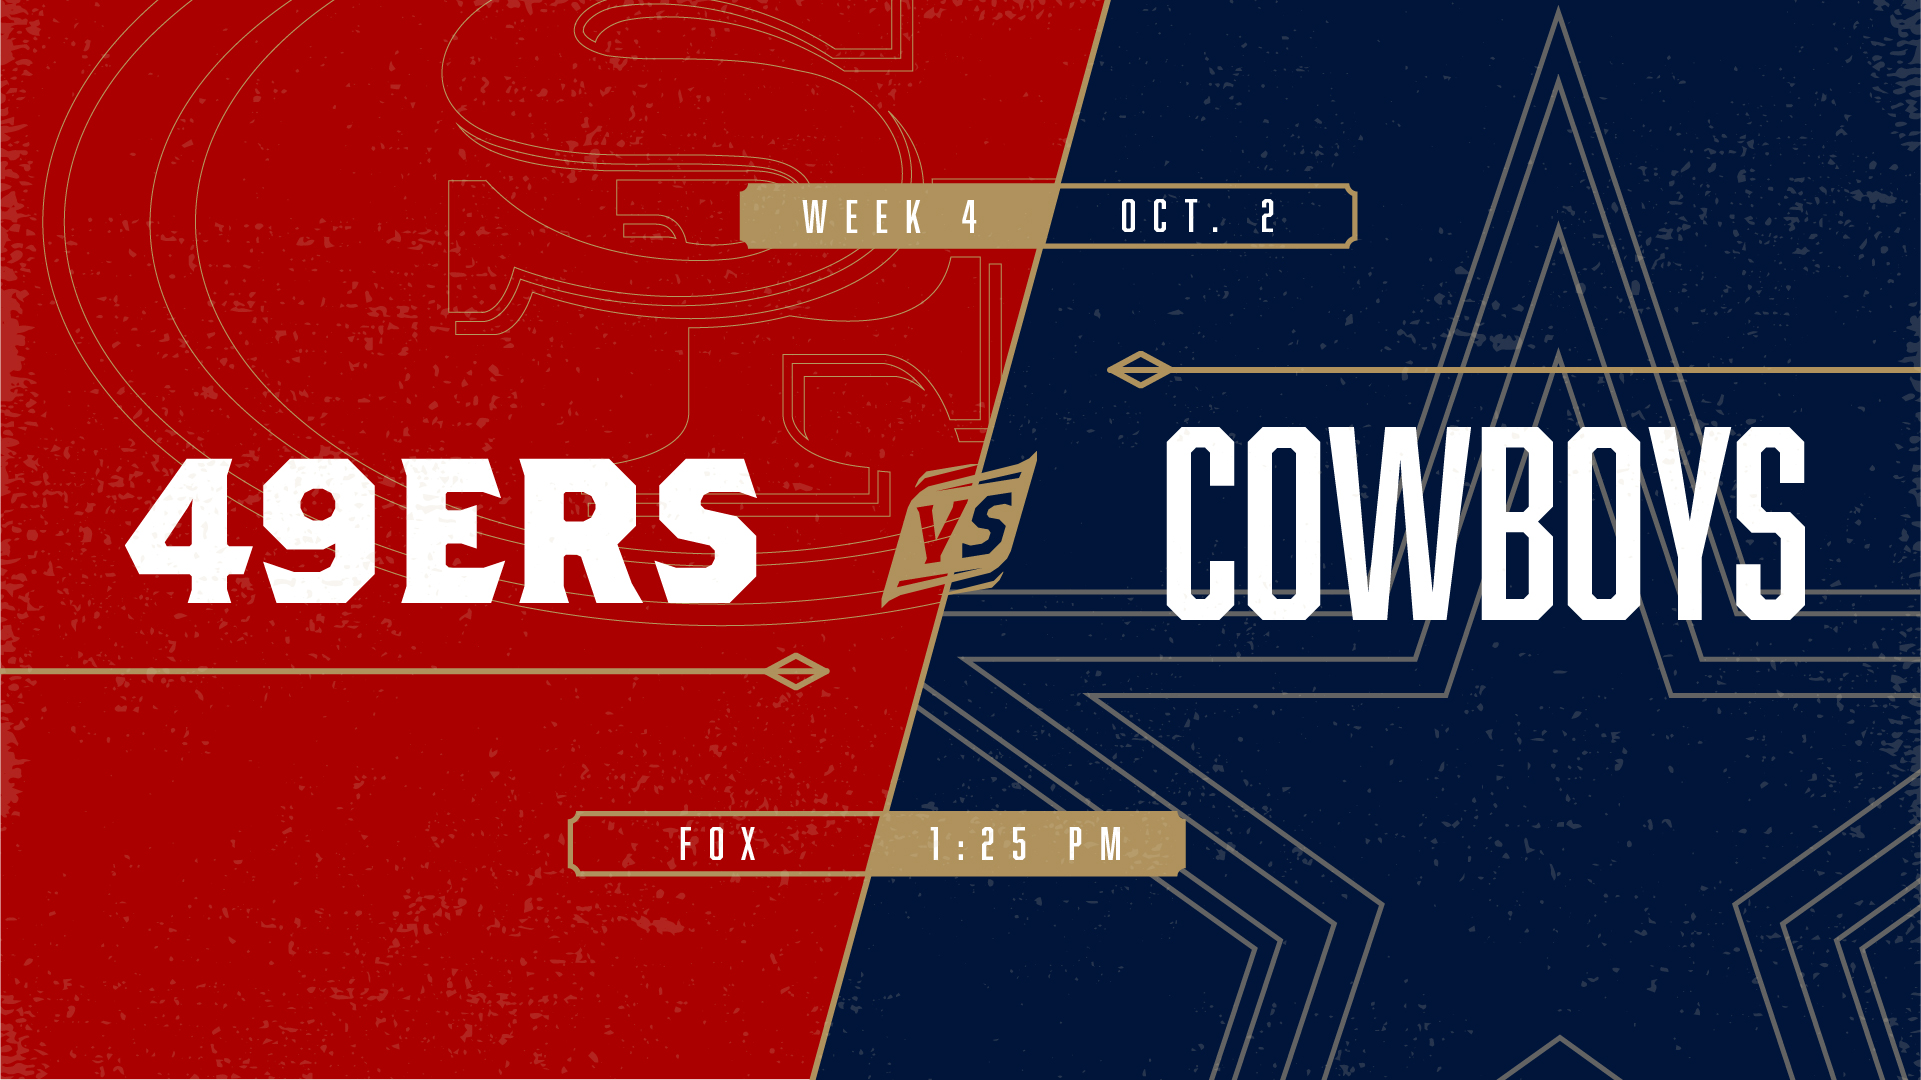 49 ers and cowboys